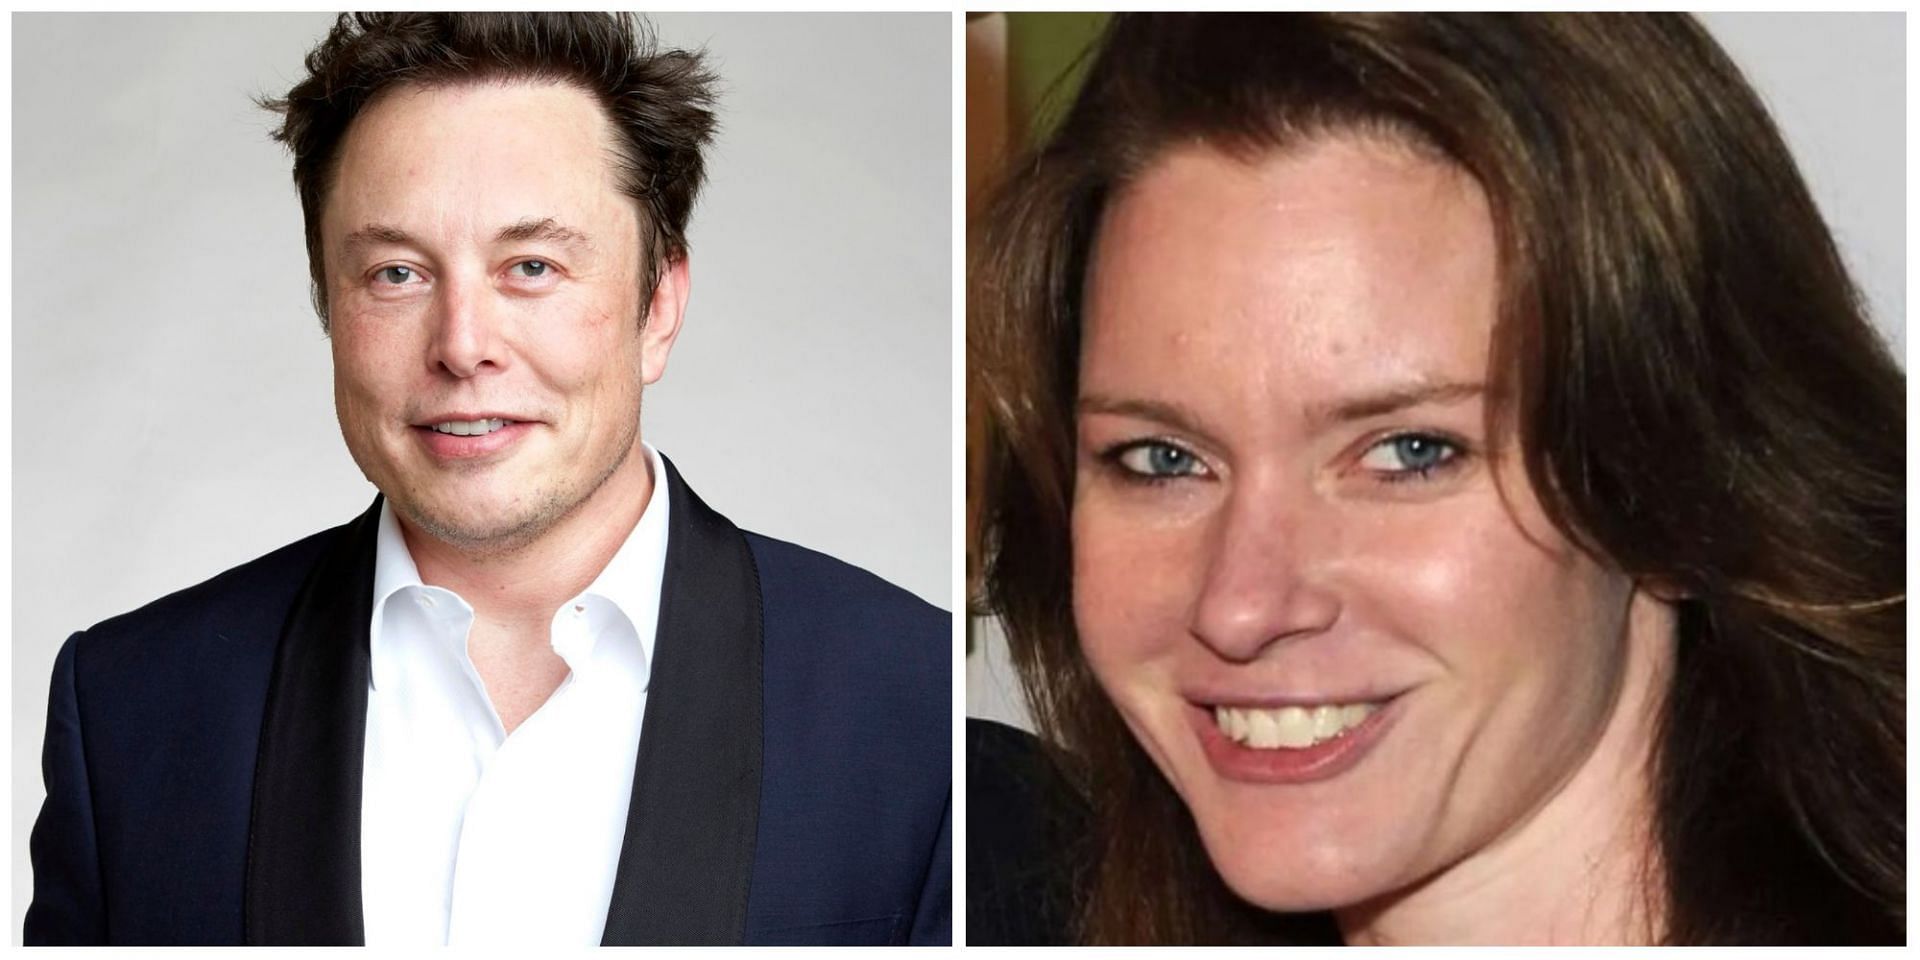 What did Elon Musk say about his daughter, Vivian? Details explored. (Image via Twitter)